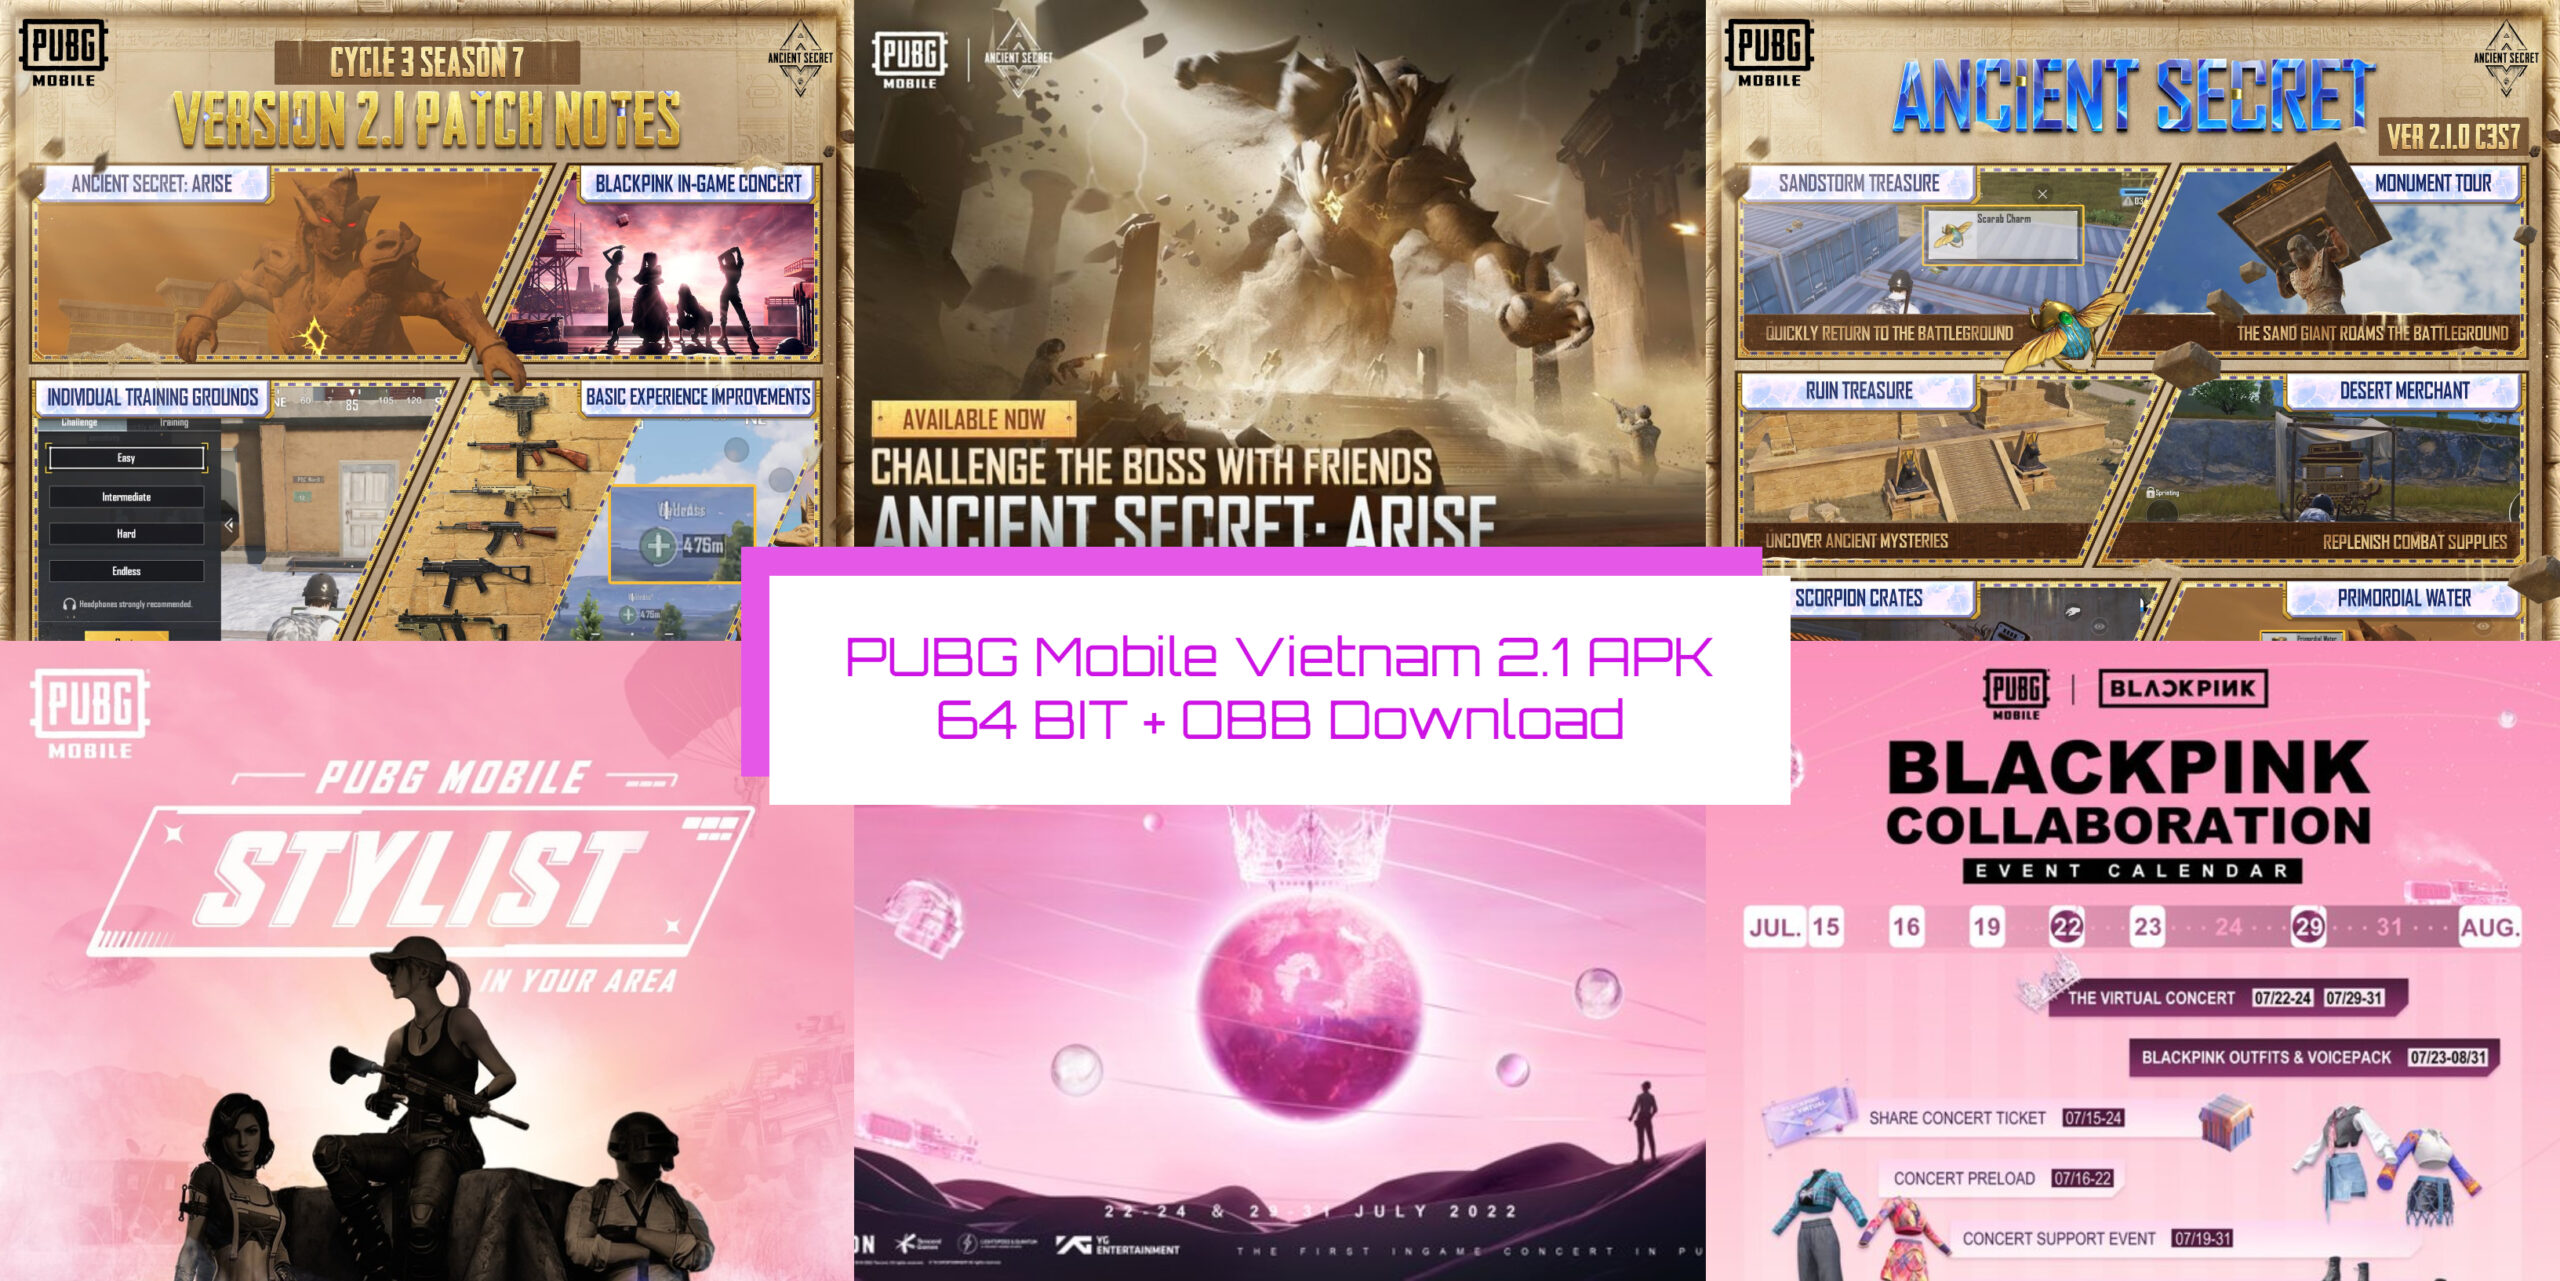 You are currently viewing PUBG Mobile VN 2.1 APK 64 BIT + OBB Download